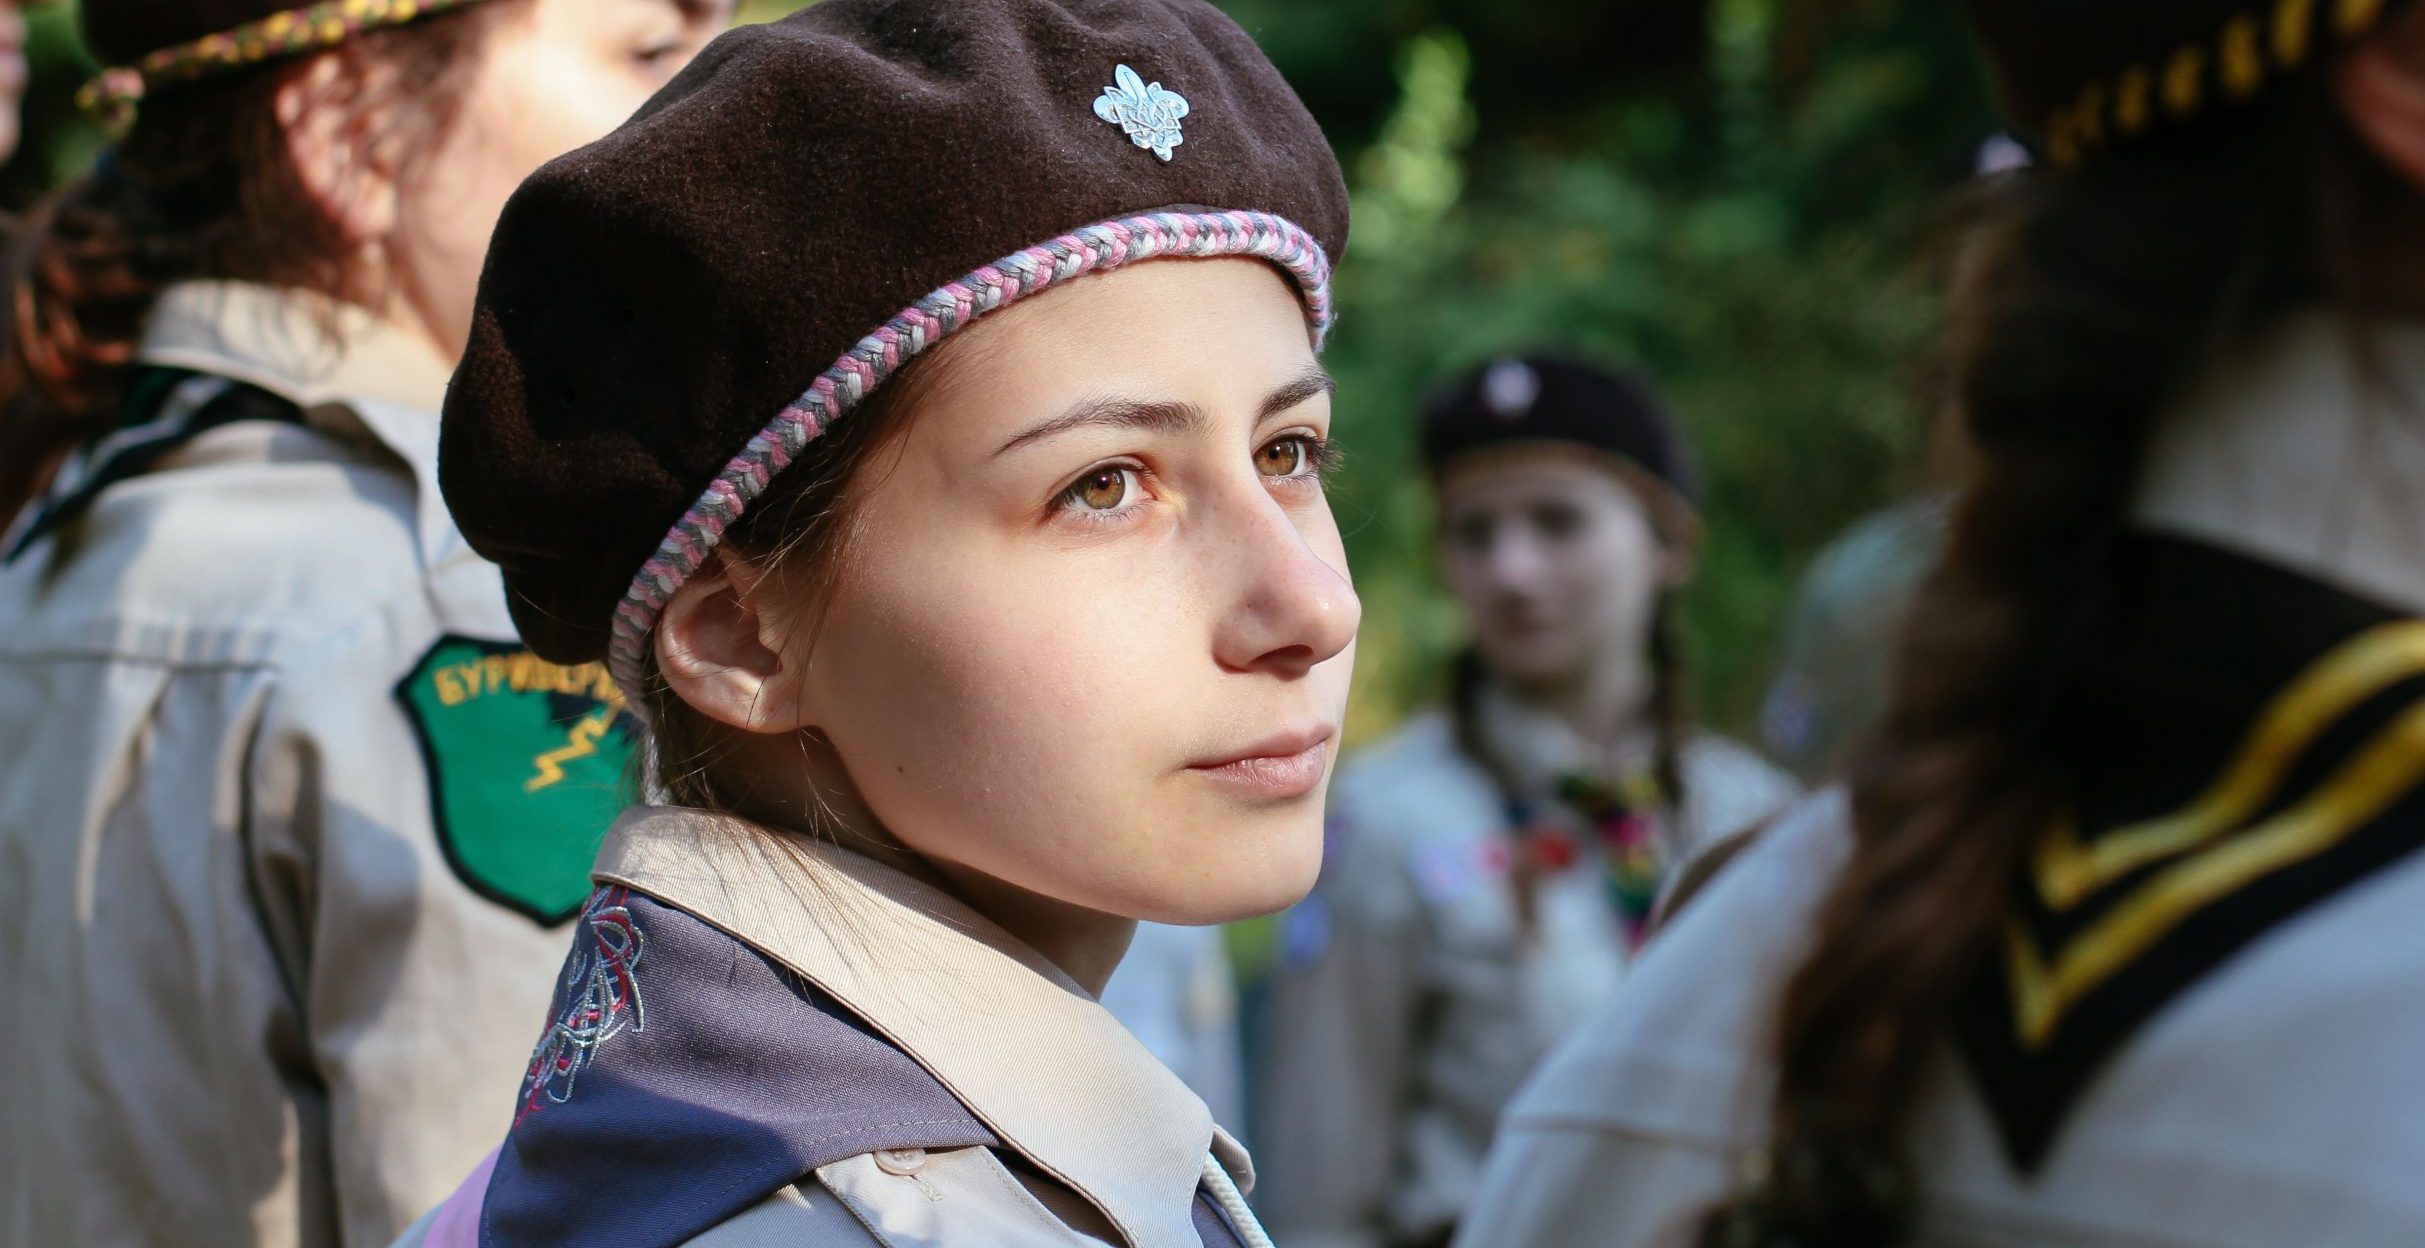 111th anniversary of Plast — Ukrainian Scouting: state support